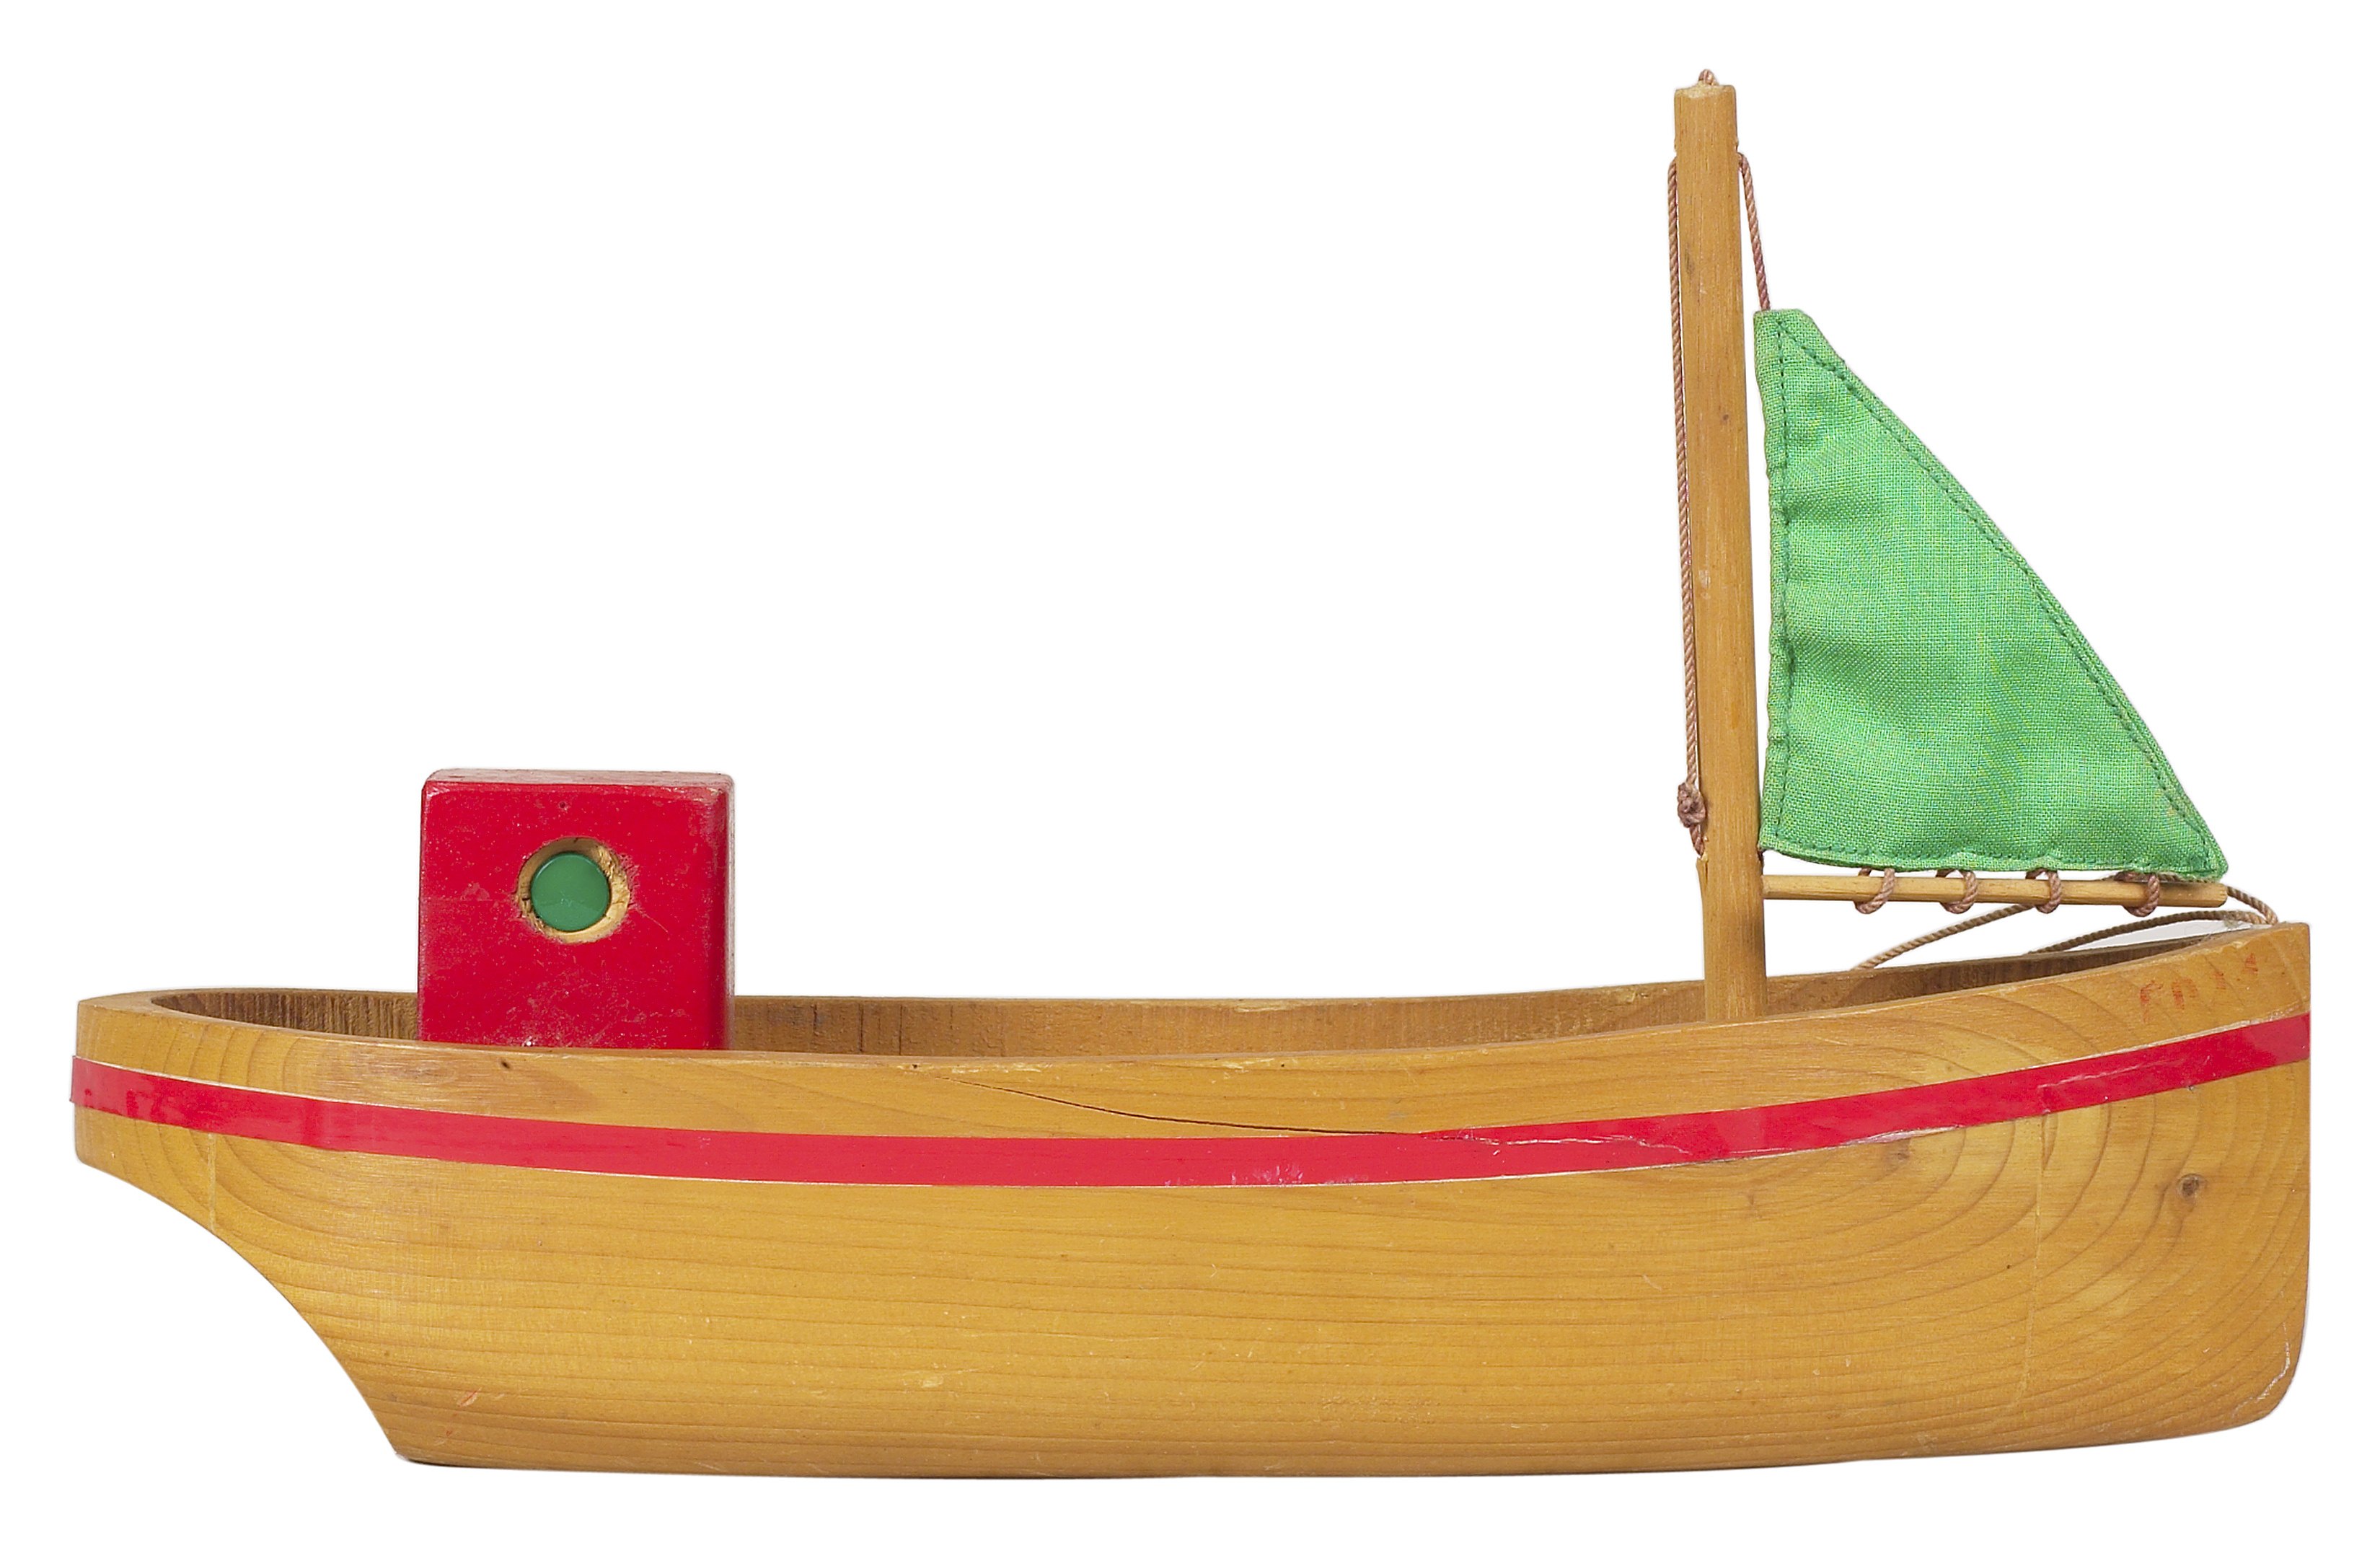 scrap wood city: how to make a wooden toy boat